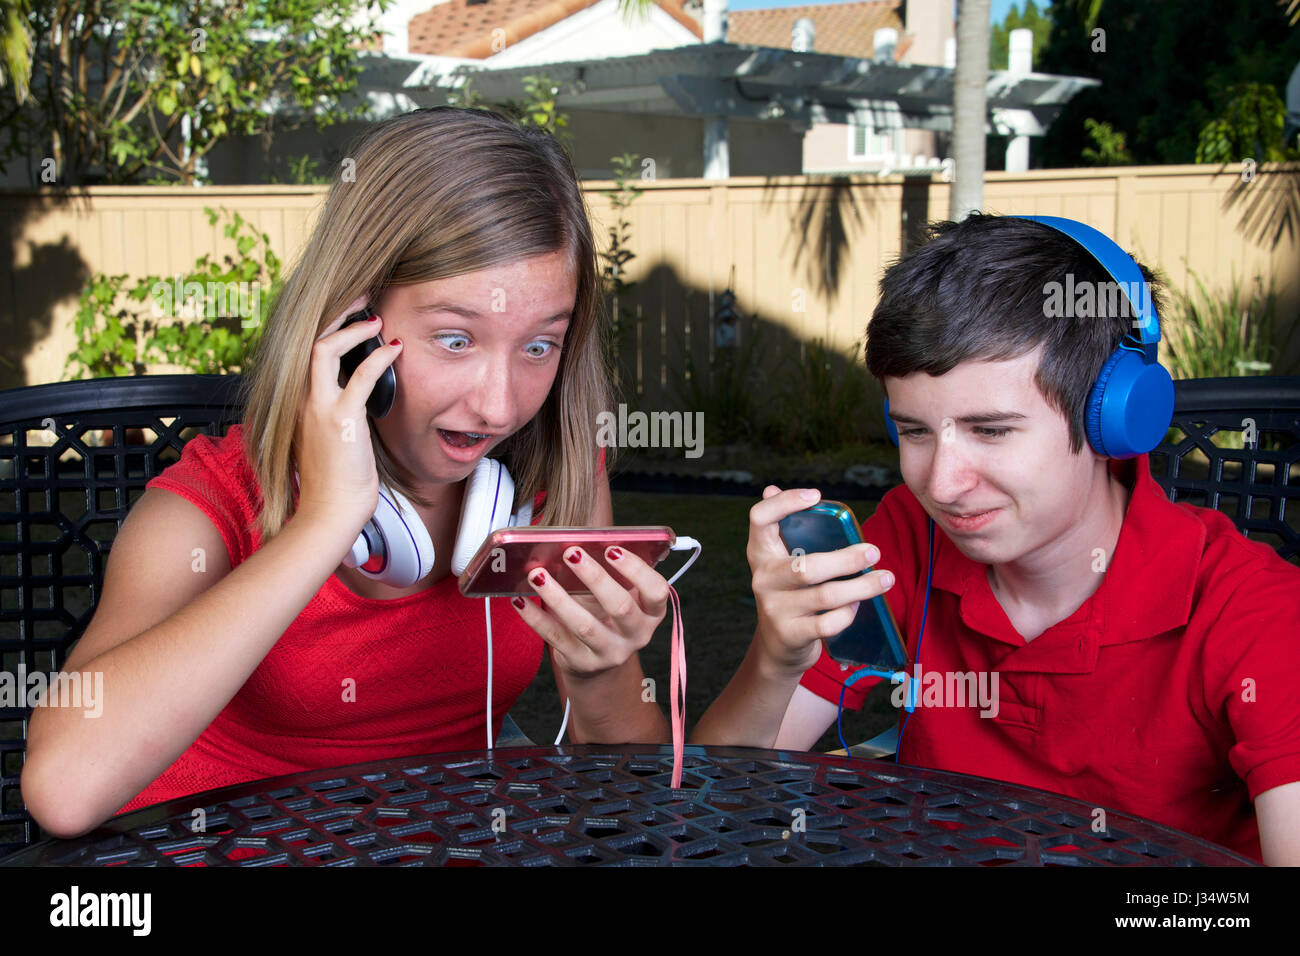 Model released image of young caucasian girl and boy, kids with technology phone game system music social media Stock Photo